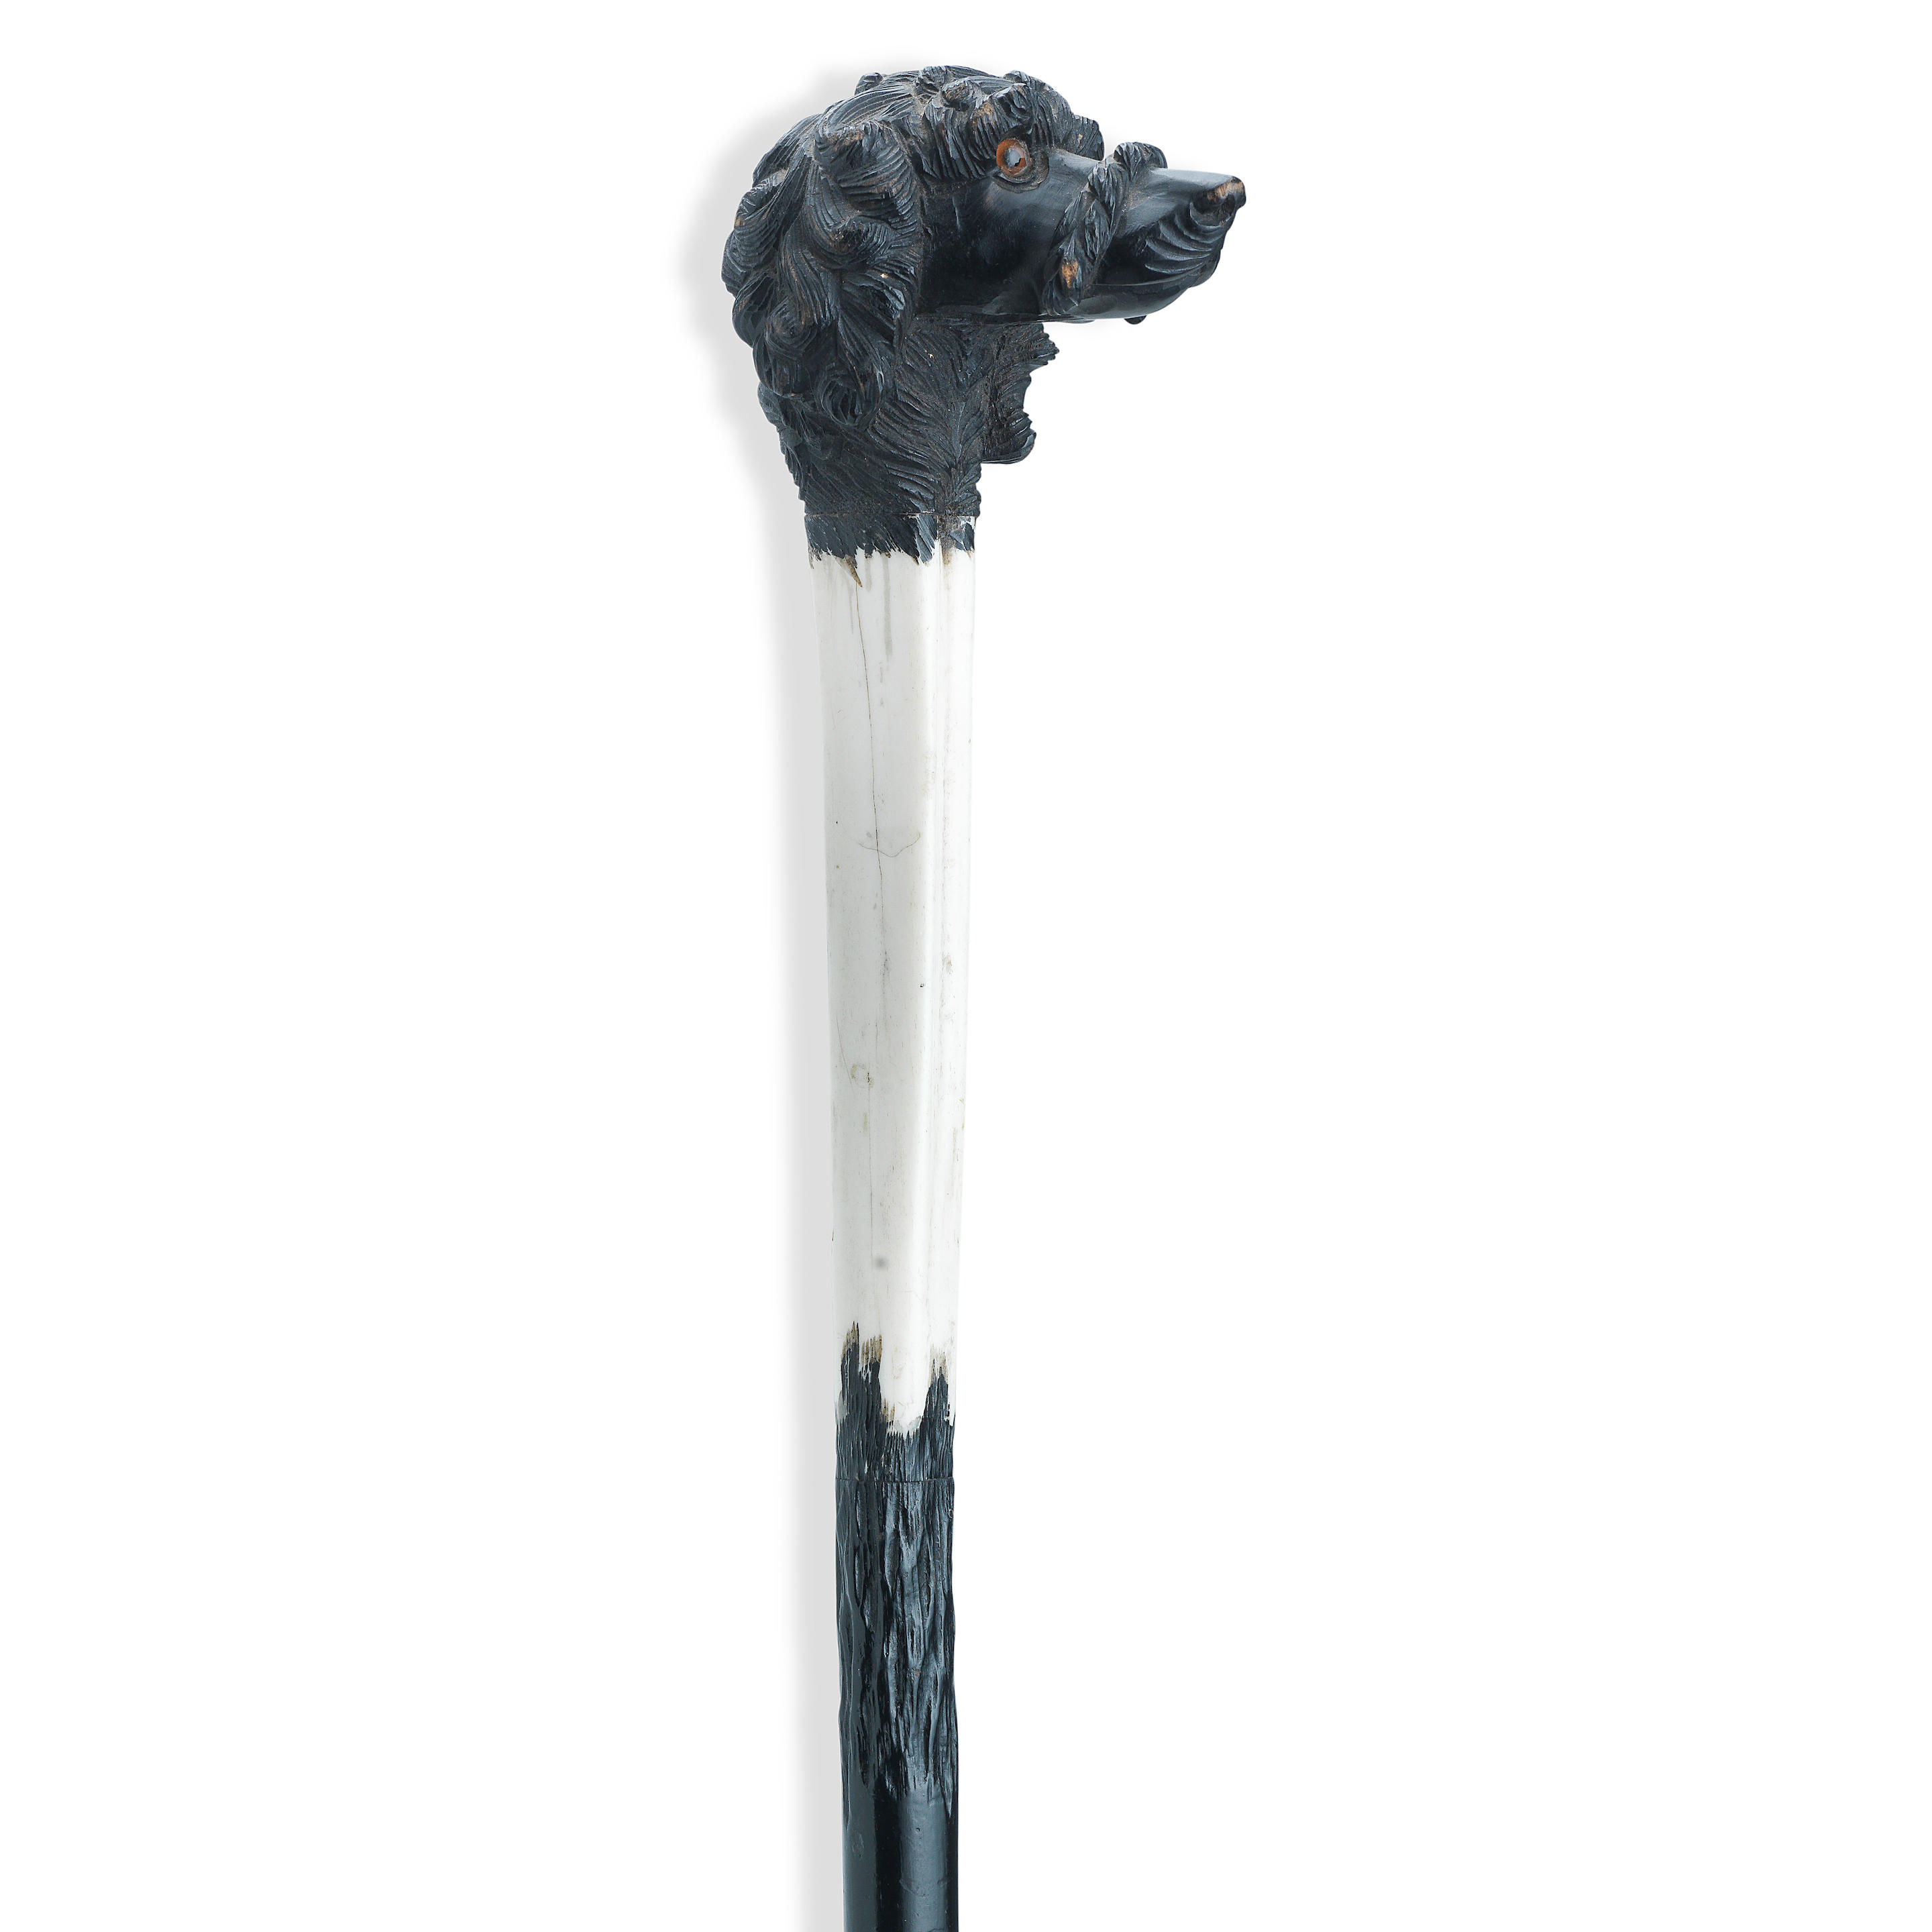 Click for larger image: A late 19th century ebony and ivory Poodle cane / walking stick - A late 19th century ebony and ivory Poodle cane / walking stick